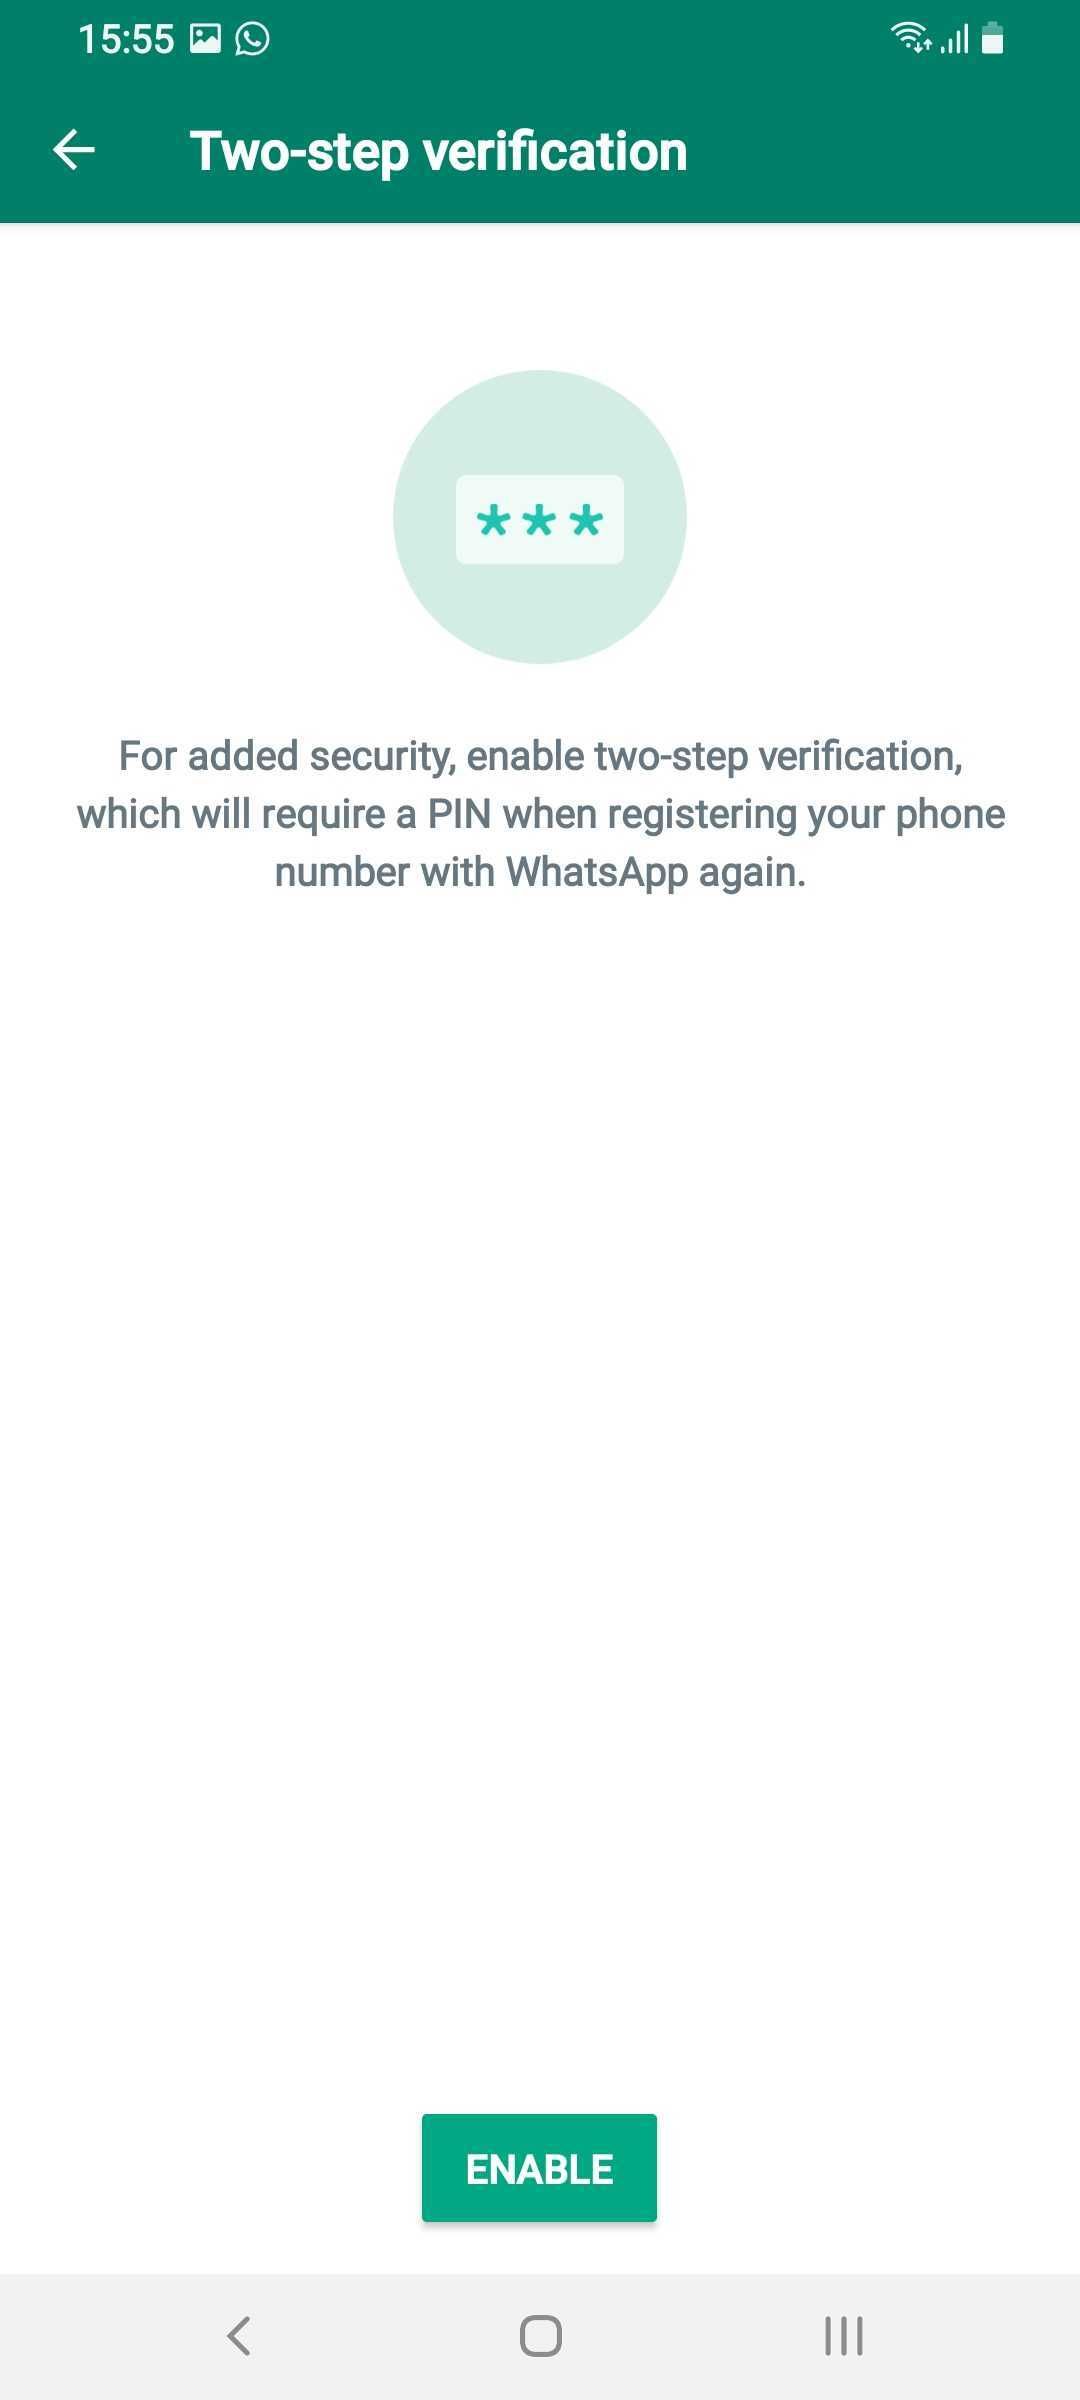 whatsapp-enable-two-factor-authentication